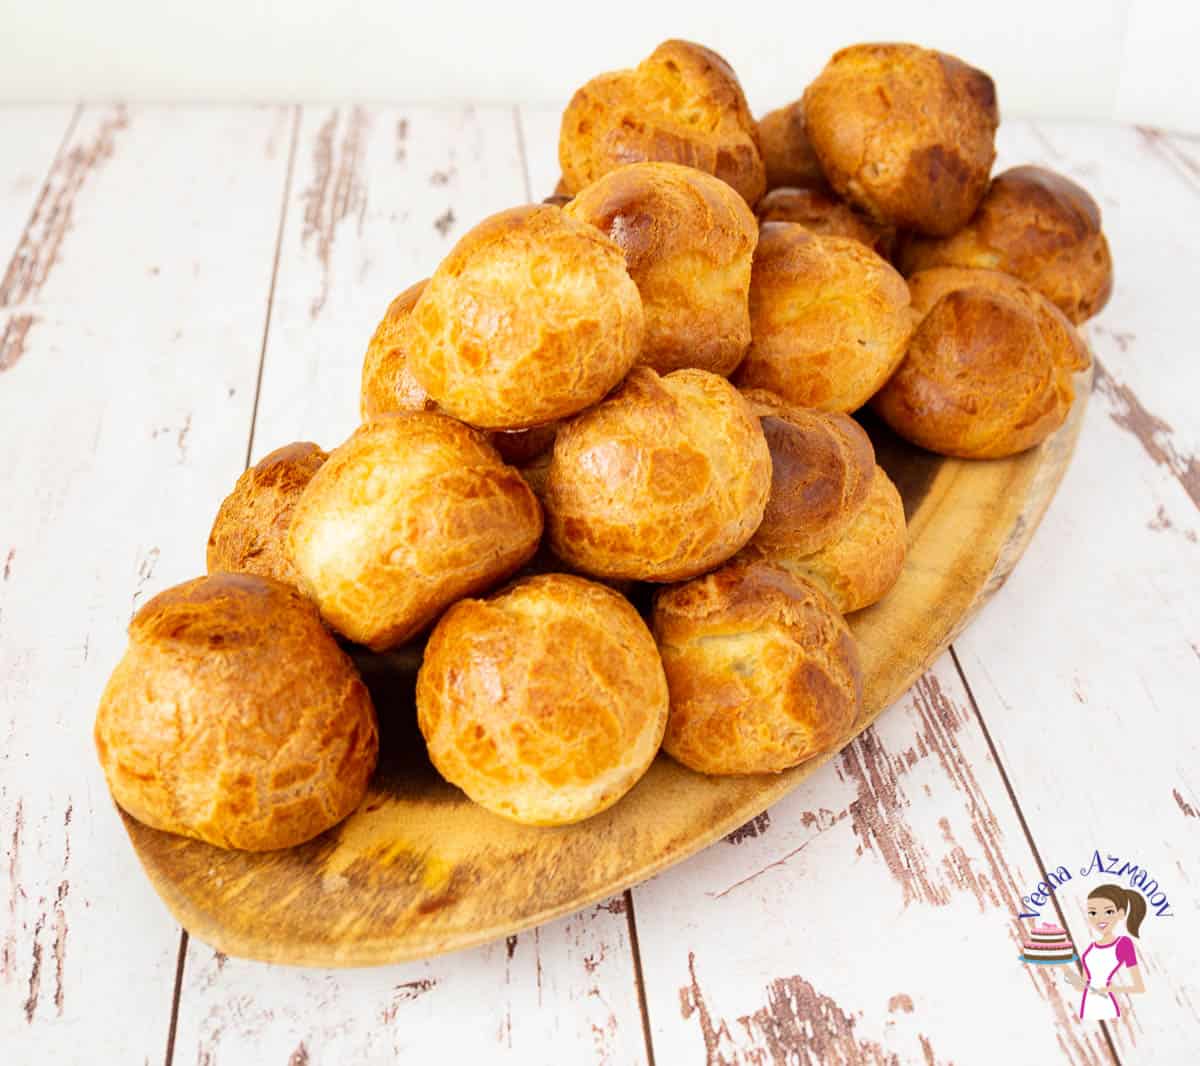 How to make choux pastry dough from scartch for cream puffs, profiteroles and eclairs